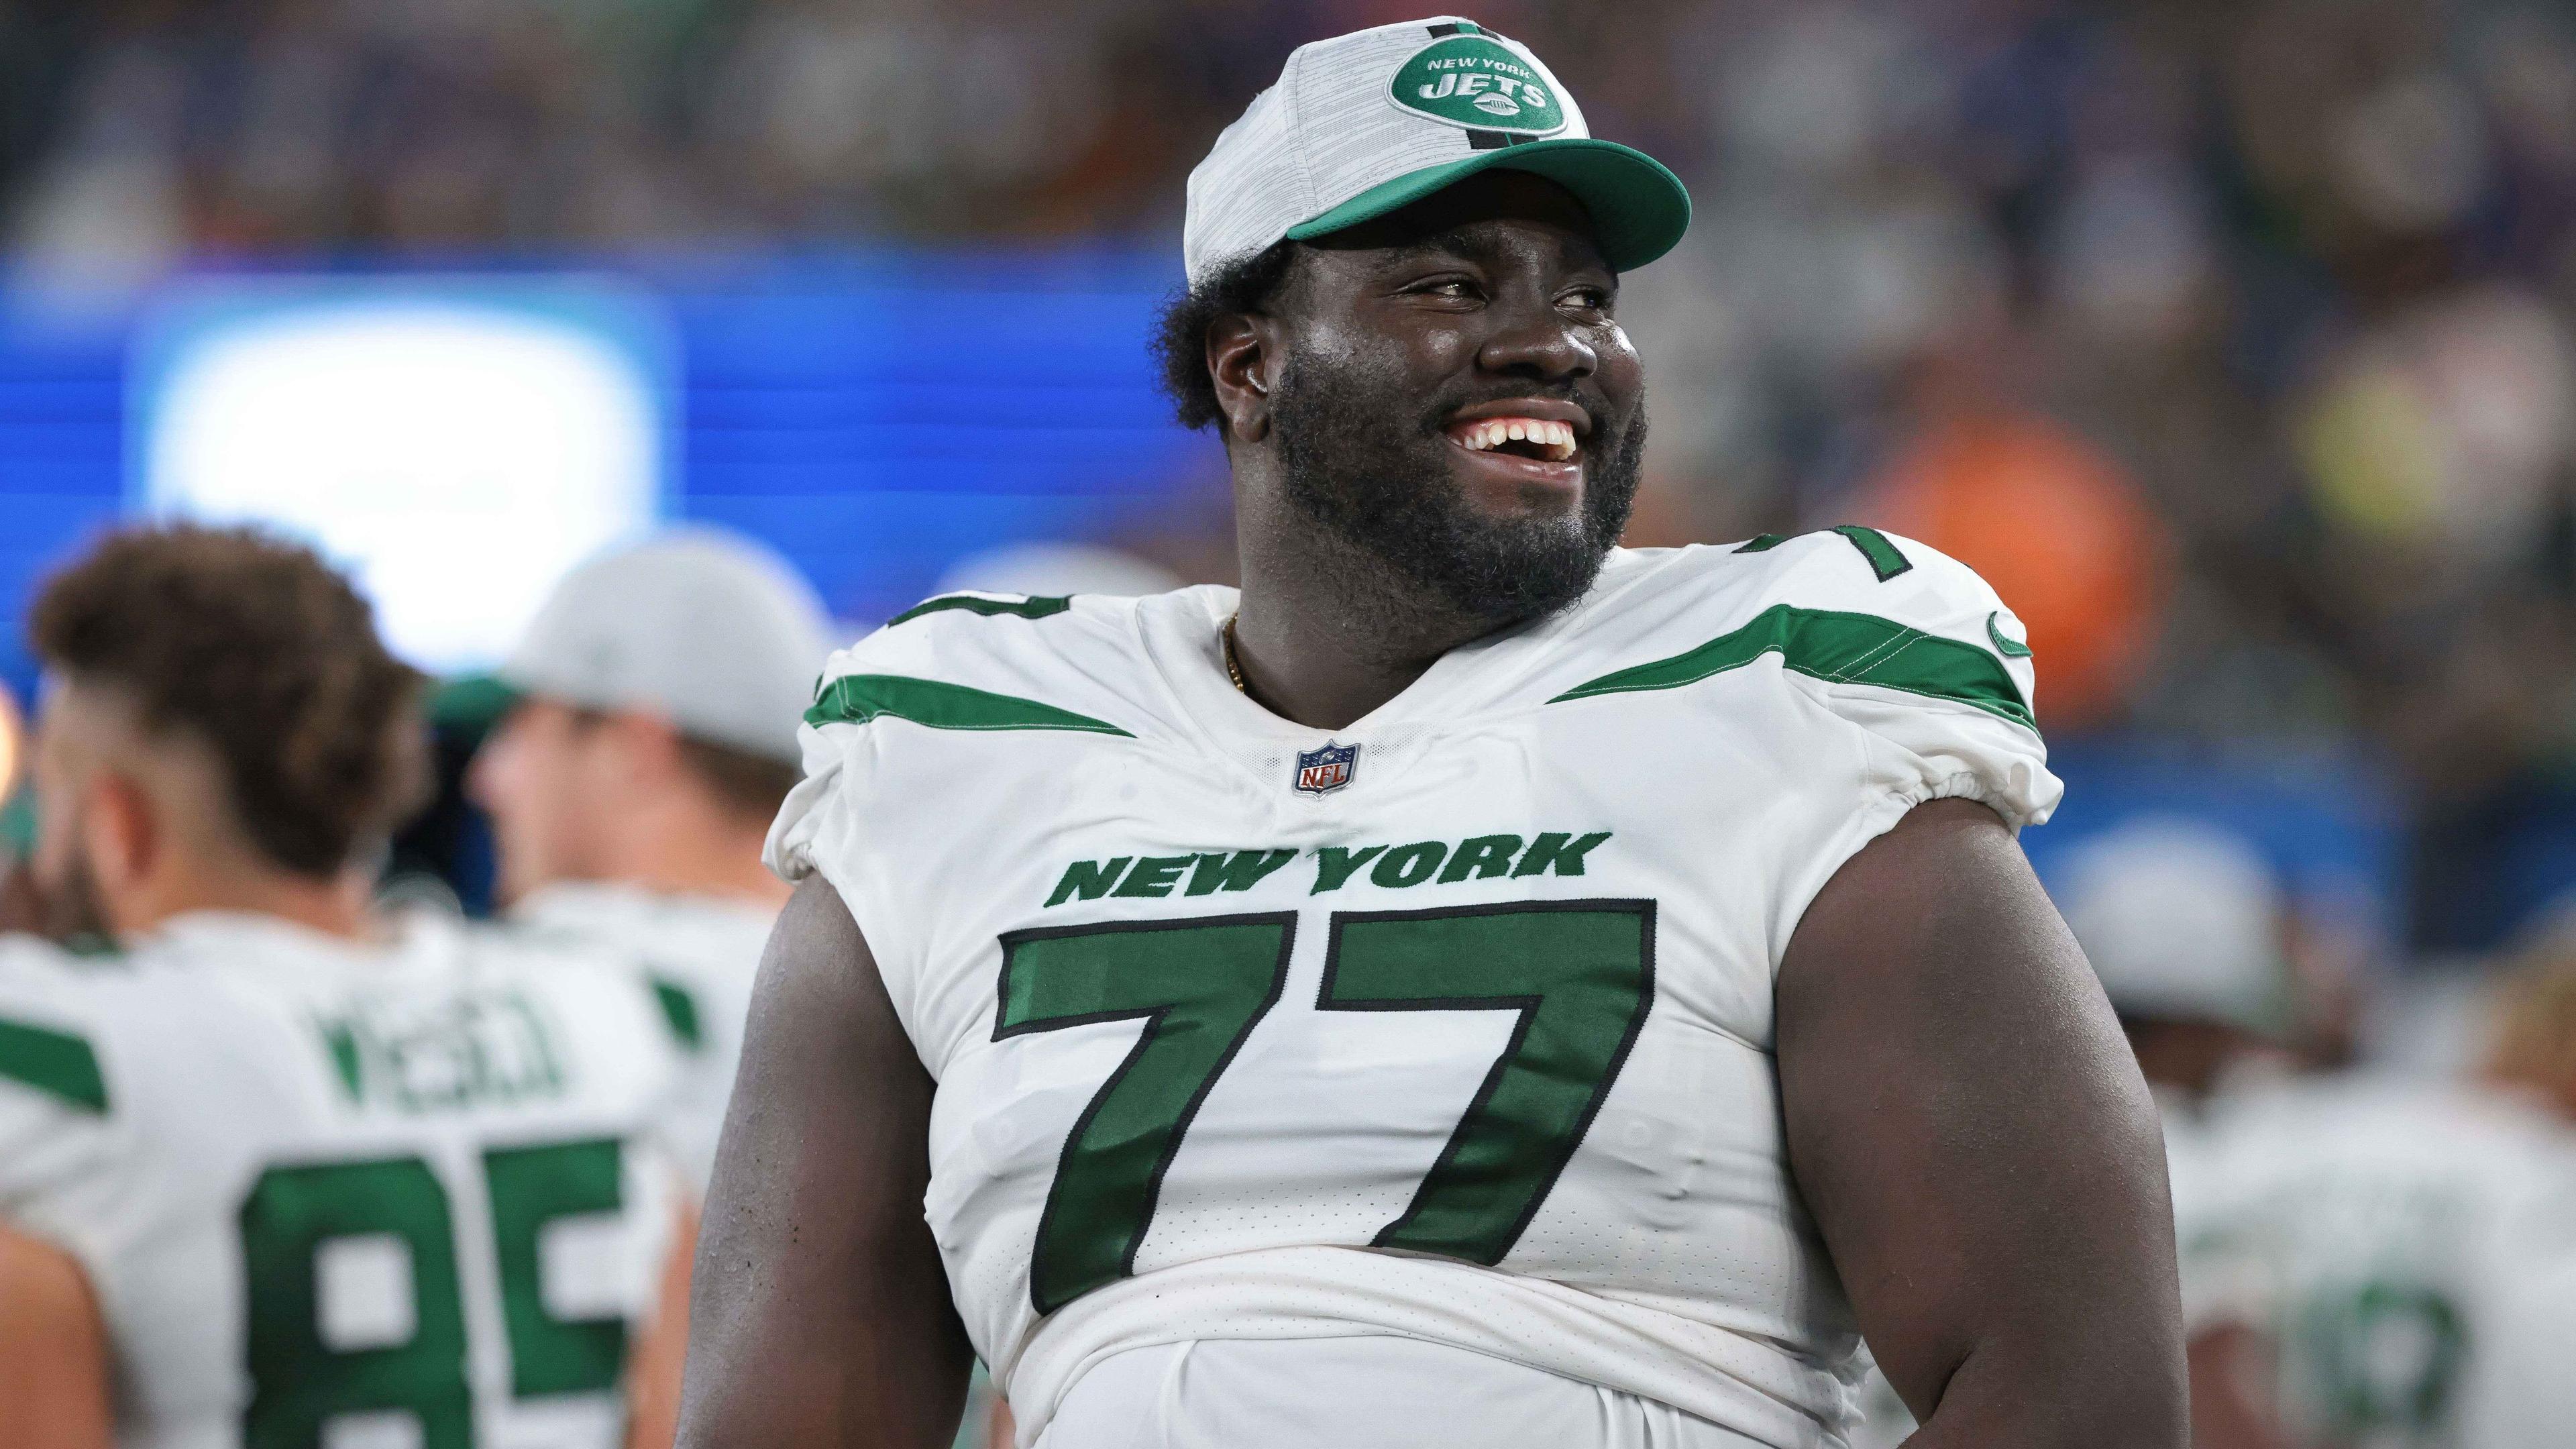 Aug 14, 2021; East Rutherford, New Jersey, USA; New York Jets offensive tackle Mekhi Becton (77) laughs during the second half against the New York Giants at MetLife Stadium. / Vincent Carchietta-USA TODAY Sports